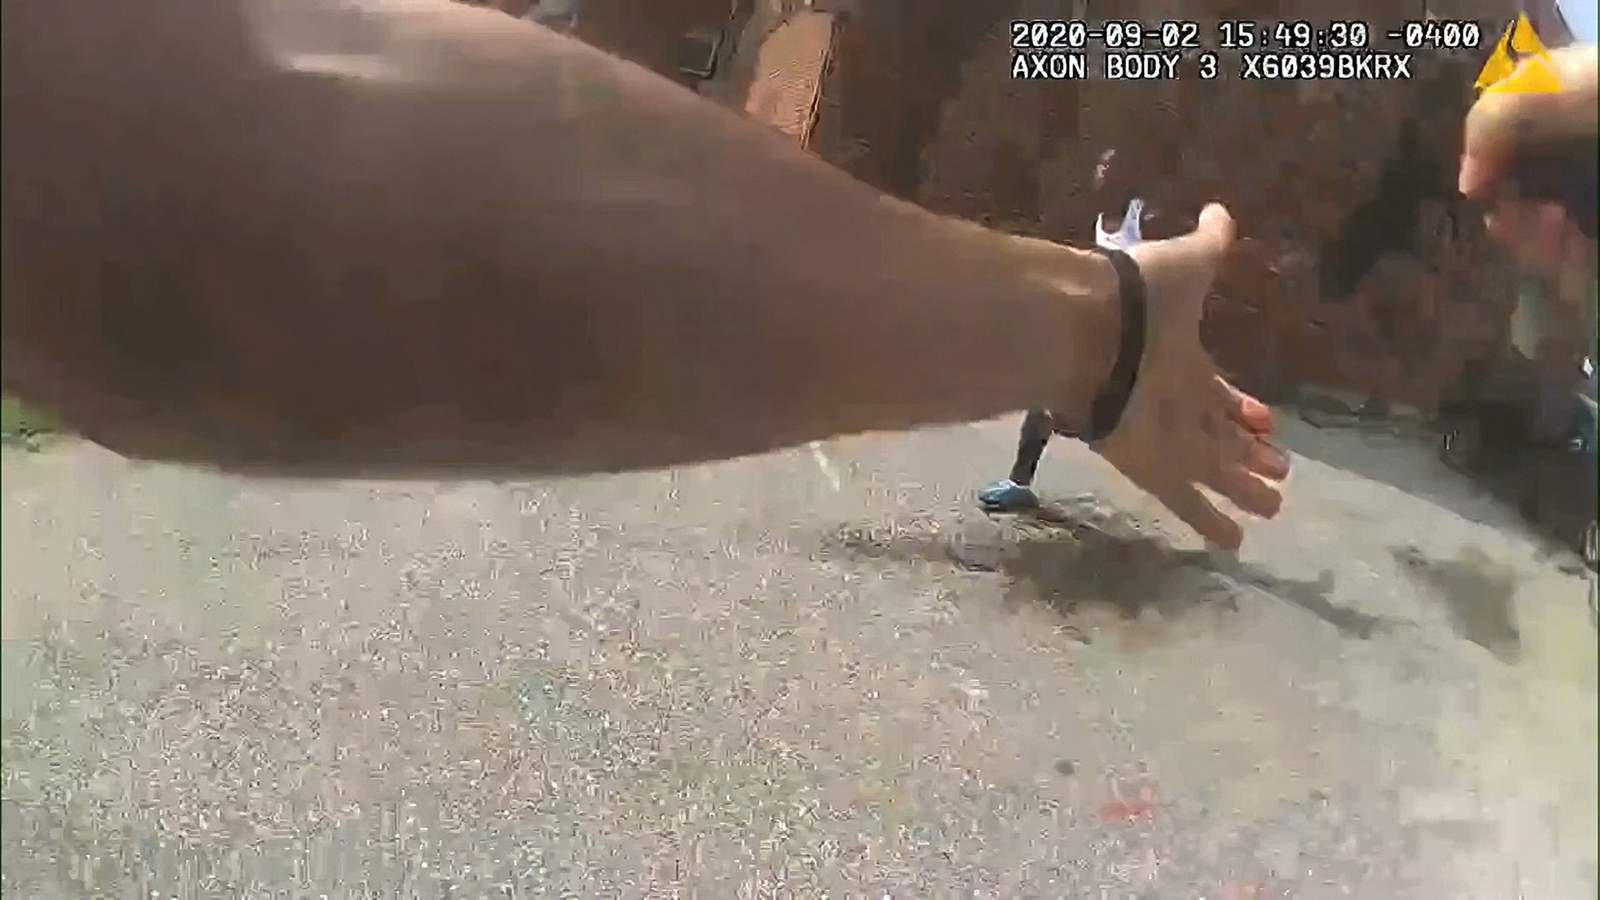 DC Police release body camera footage from fatal shooting